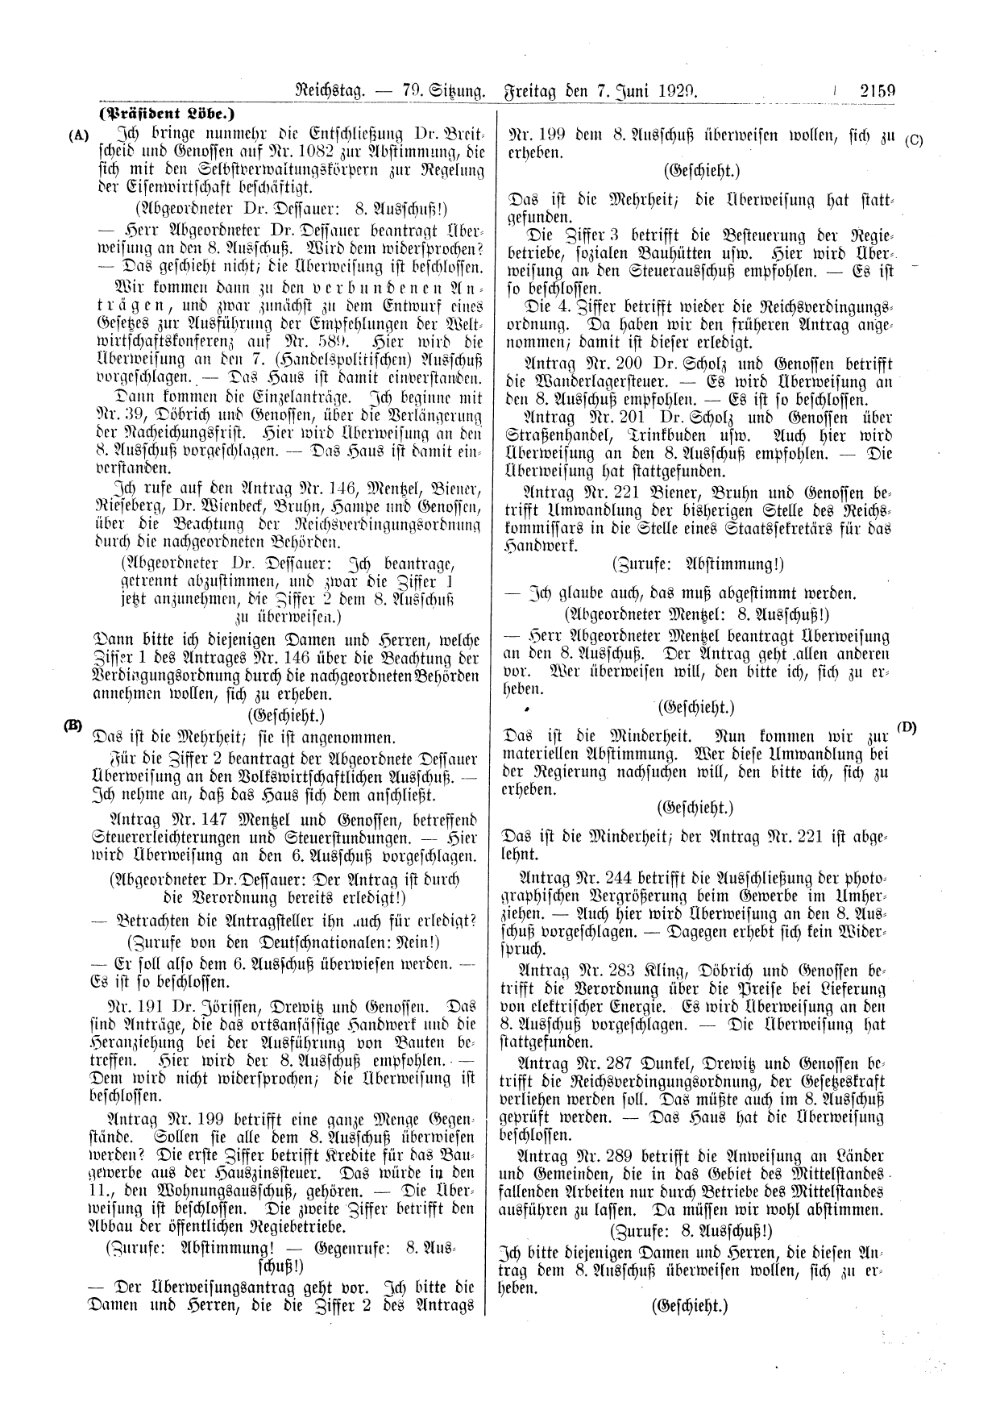 Scan of page 2159